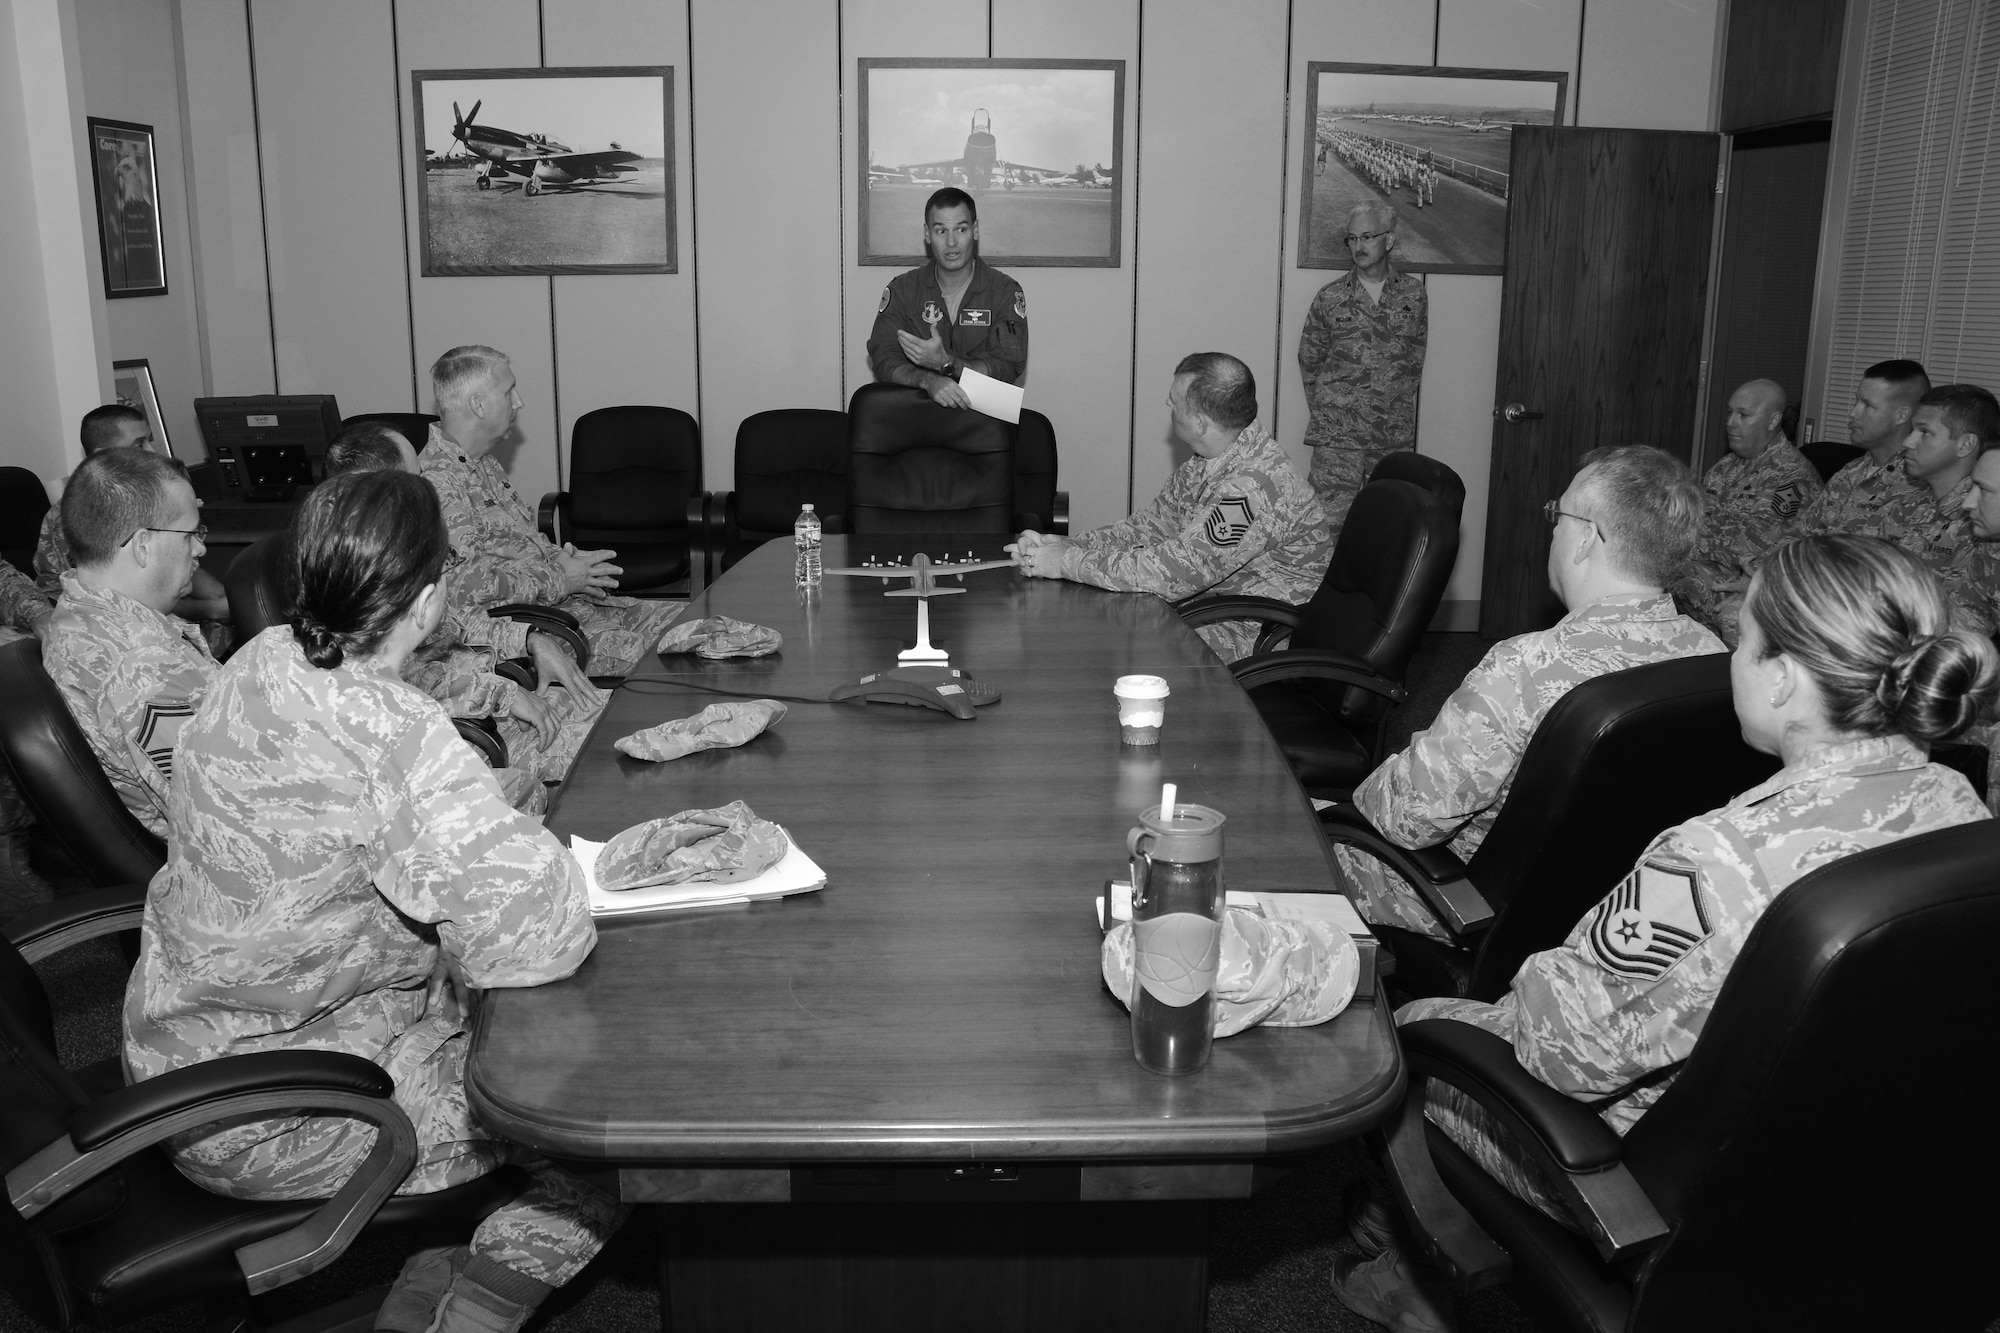 Col. Frank Detorie, commander of the 103rd Airlift Wing, addresses approximately 25 Airmen who are newly appointed members of the wing’s inspection team, at Bradley Air National Guard Base, East Granby, Conn., June 10, 2014.  “You all are charged with administering what’s called the CCIP, that’s the commander’s inspection program—that’s my program. What that means is while you are out there doing this job, you speak for me,” said Detorie.  (U.S. Air National Guard photo by Tech. Sgt. Joshua Mead)